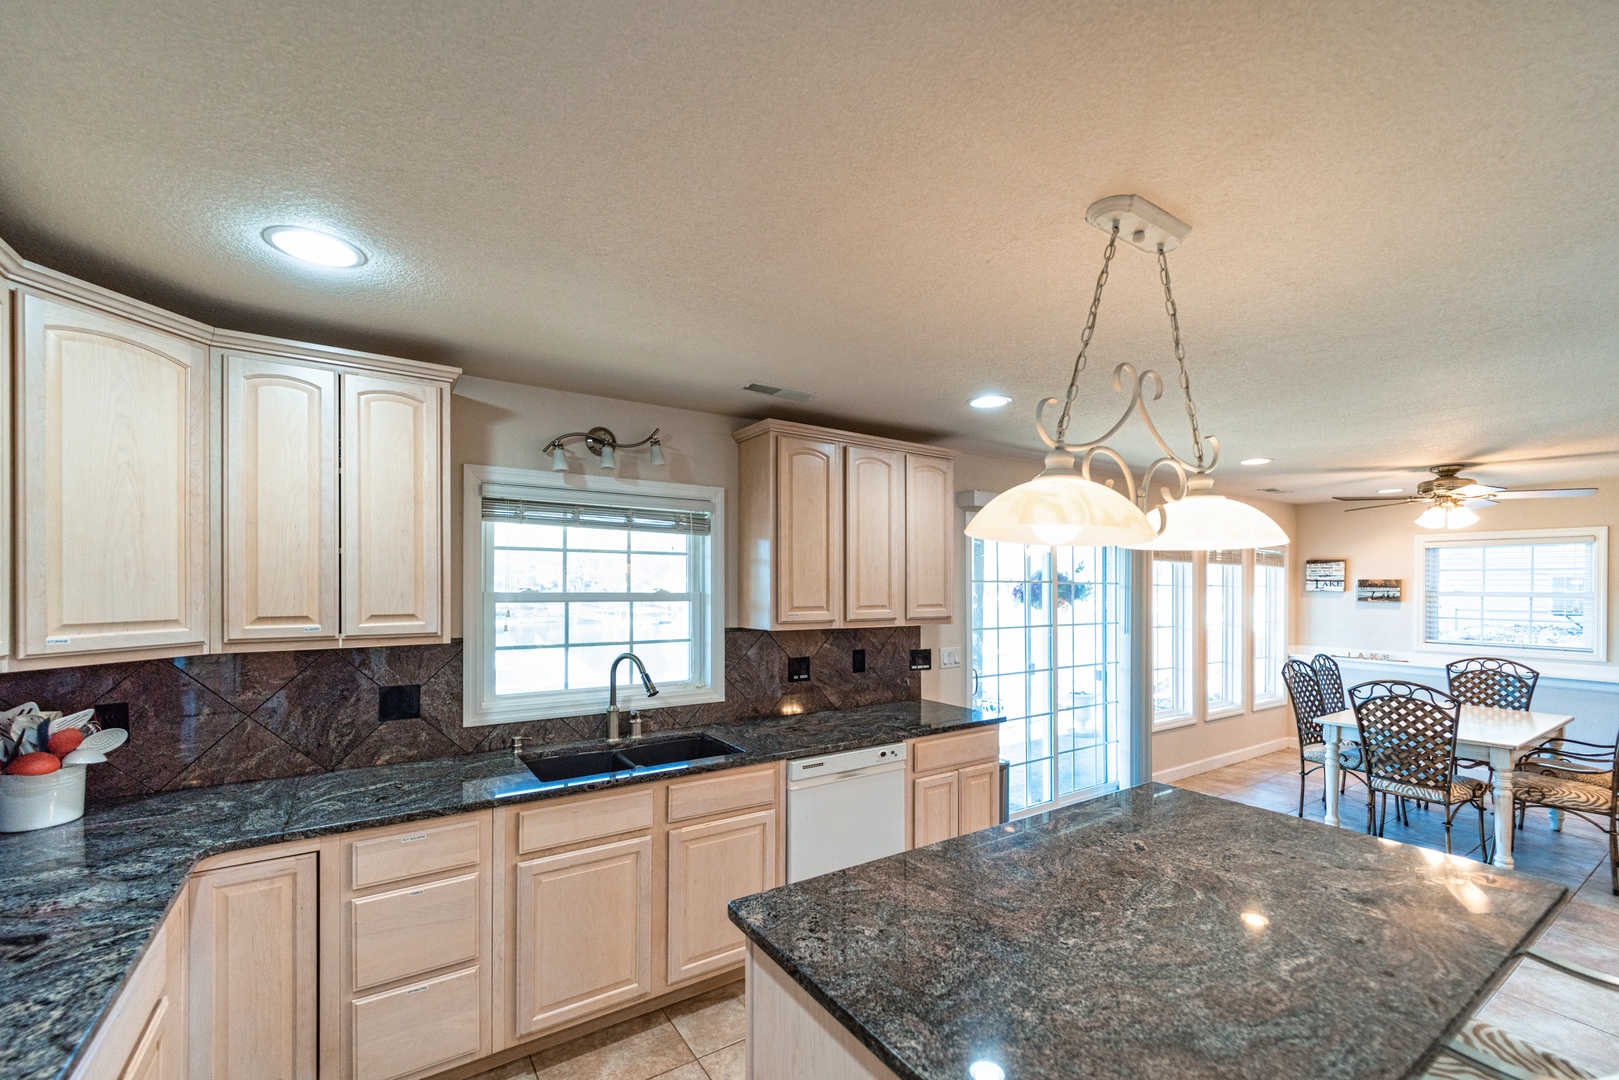 Downstairs, the open kitchen offers ample space & all the comforts of home